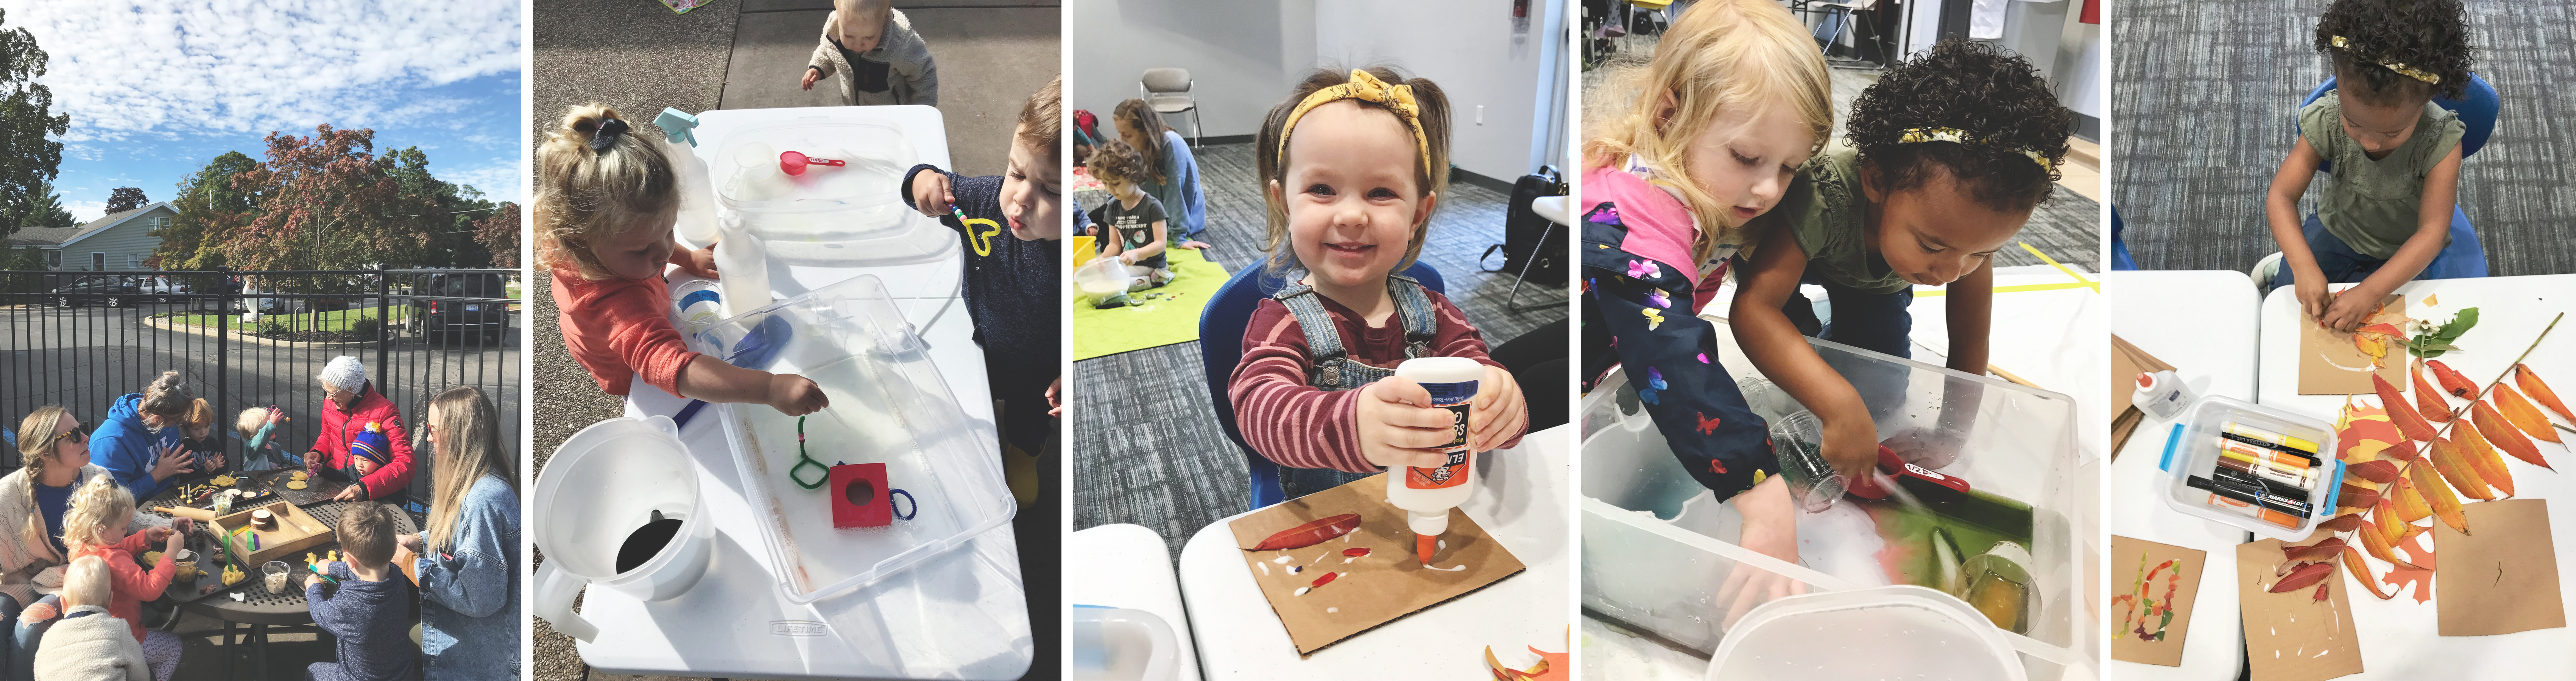 Images of the little explorers in sensory play and STEAM activities.